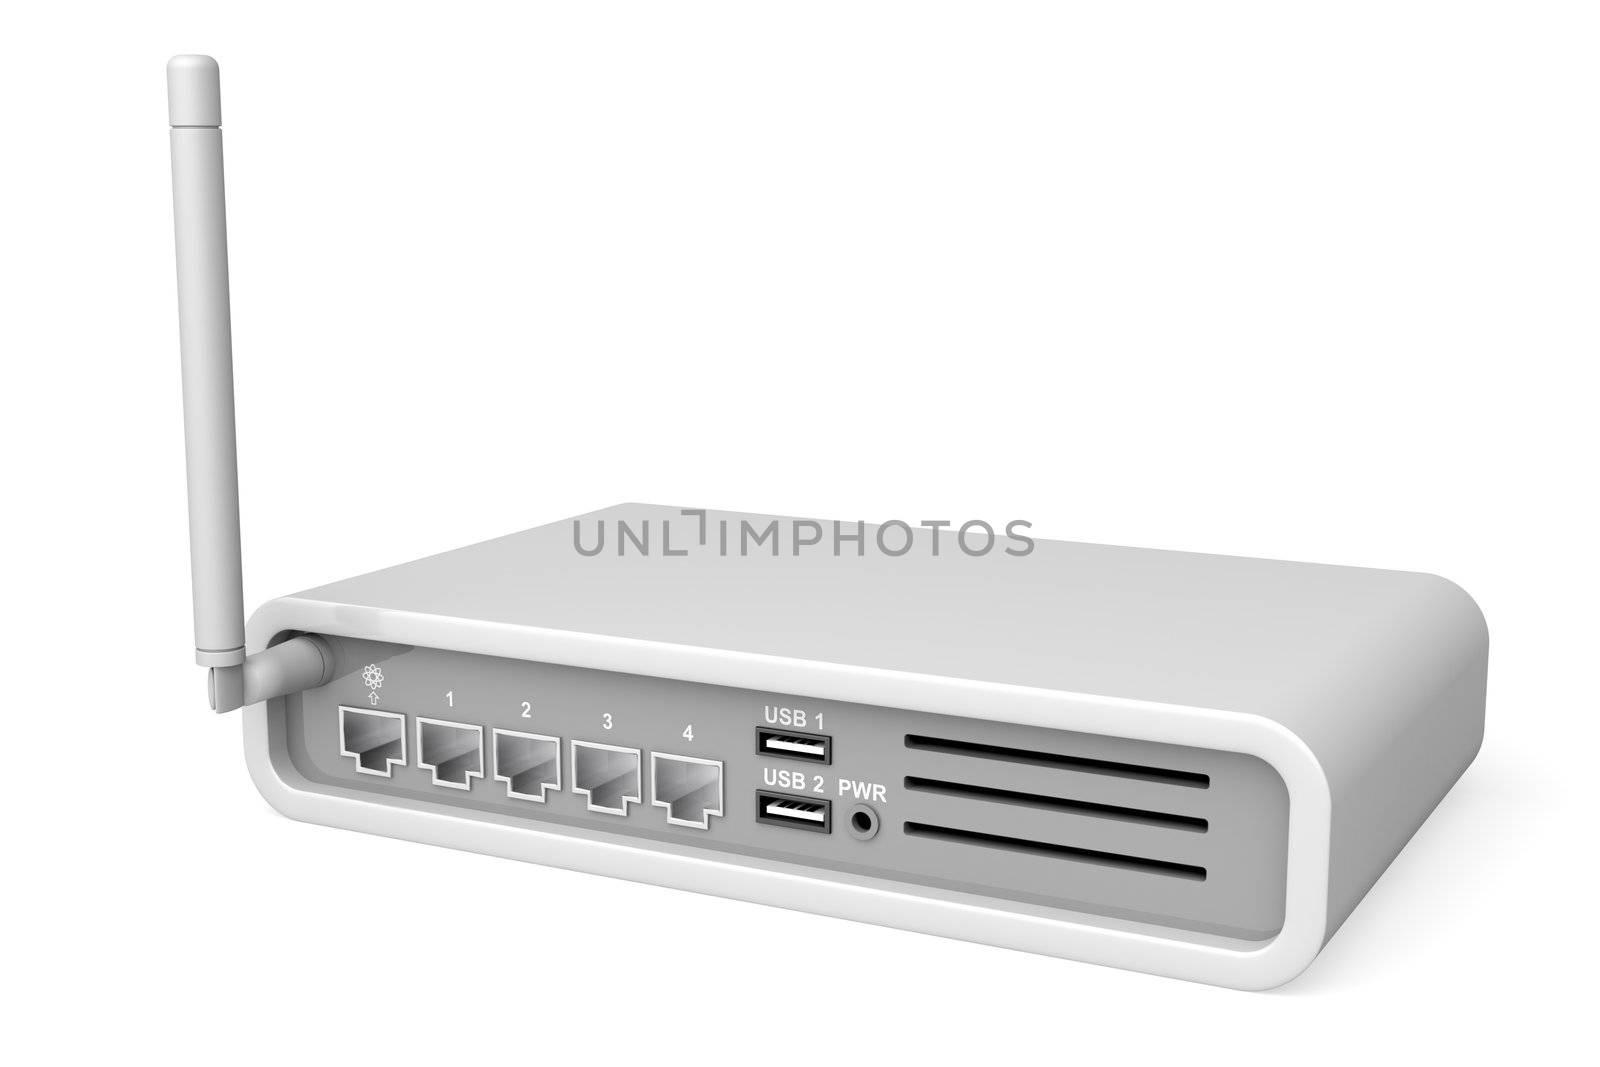 Back view of wireless router on white background